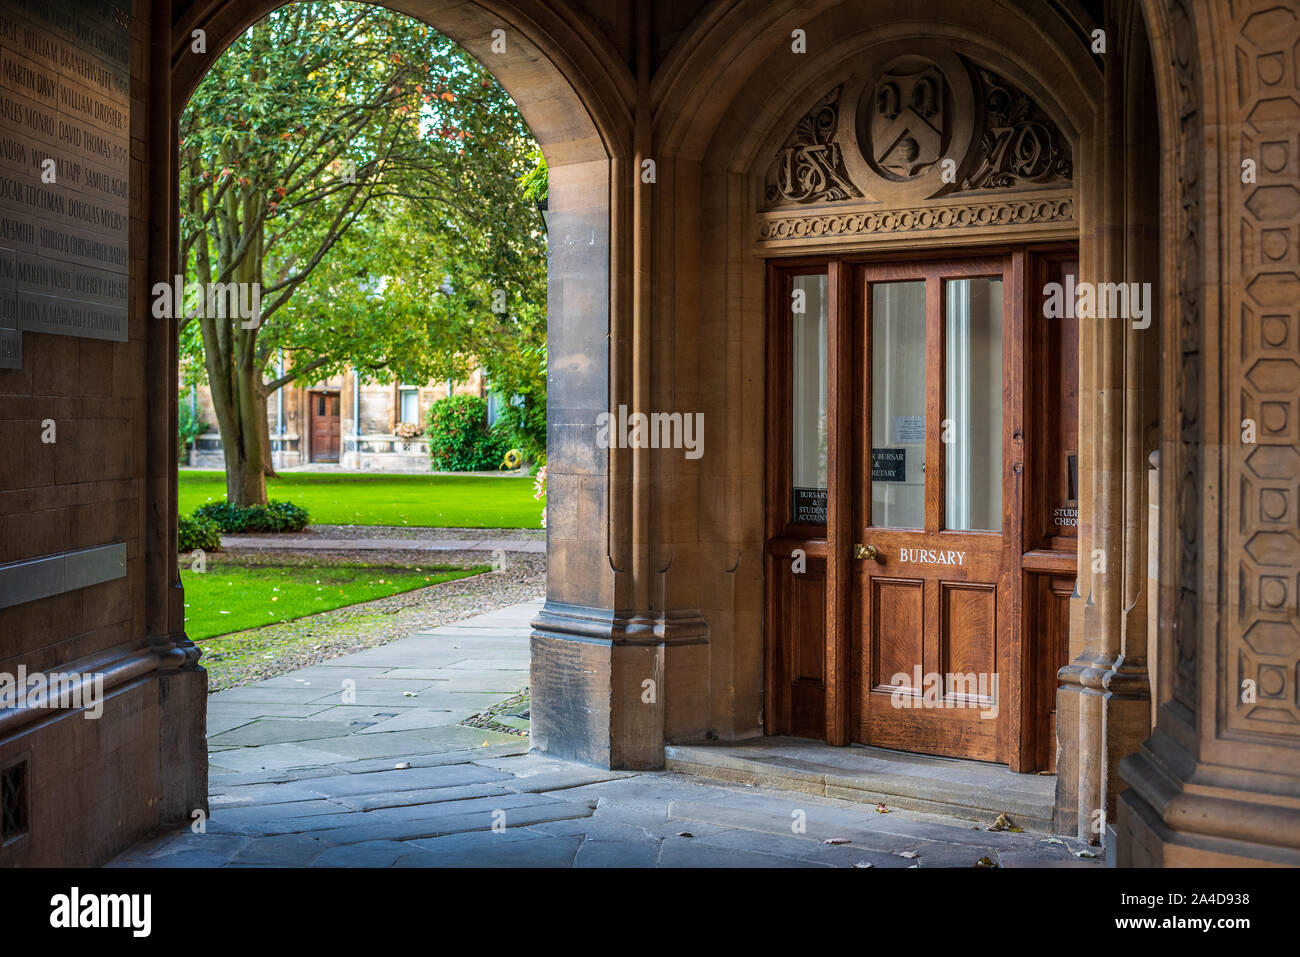 College Bursary at Gonville & Caius College, part of the Cambridge University. The University Bursary manages the financial affairs of the College. Stock Photo